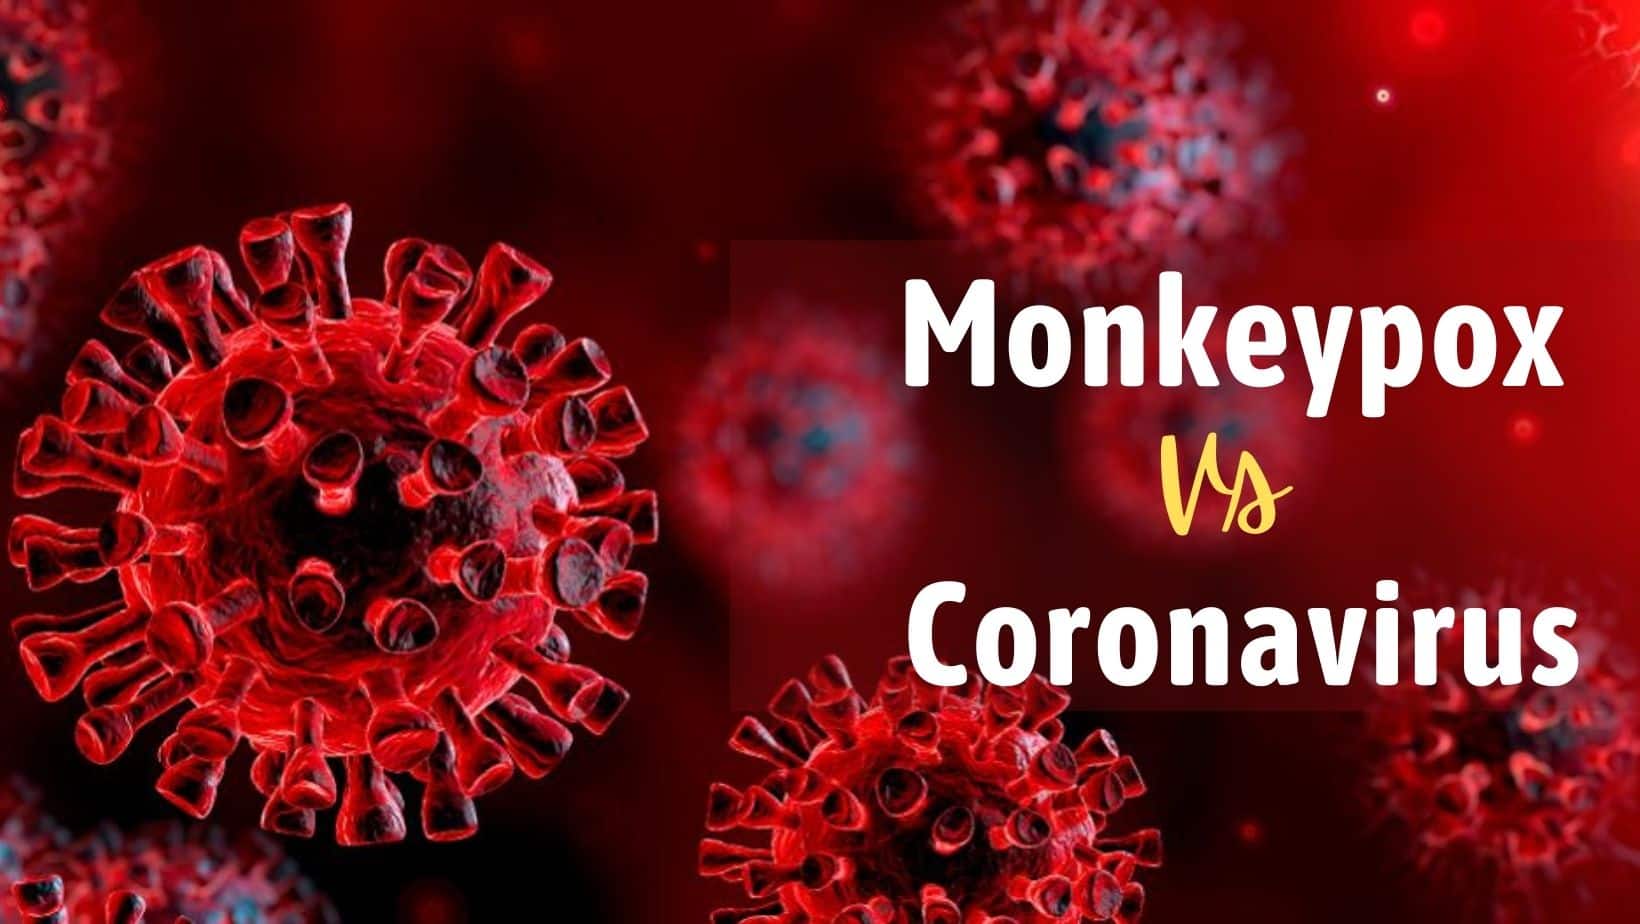 Monkeypox Vs Coronavirus: How The Two Virus Infection Differs, Which One Is A Bigger Threat?